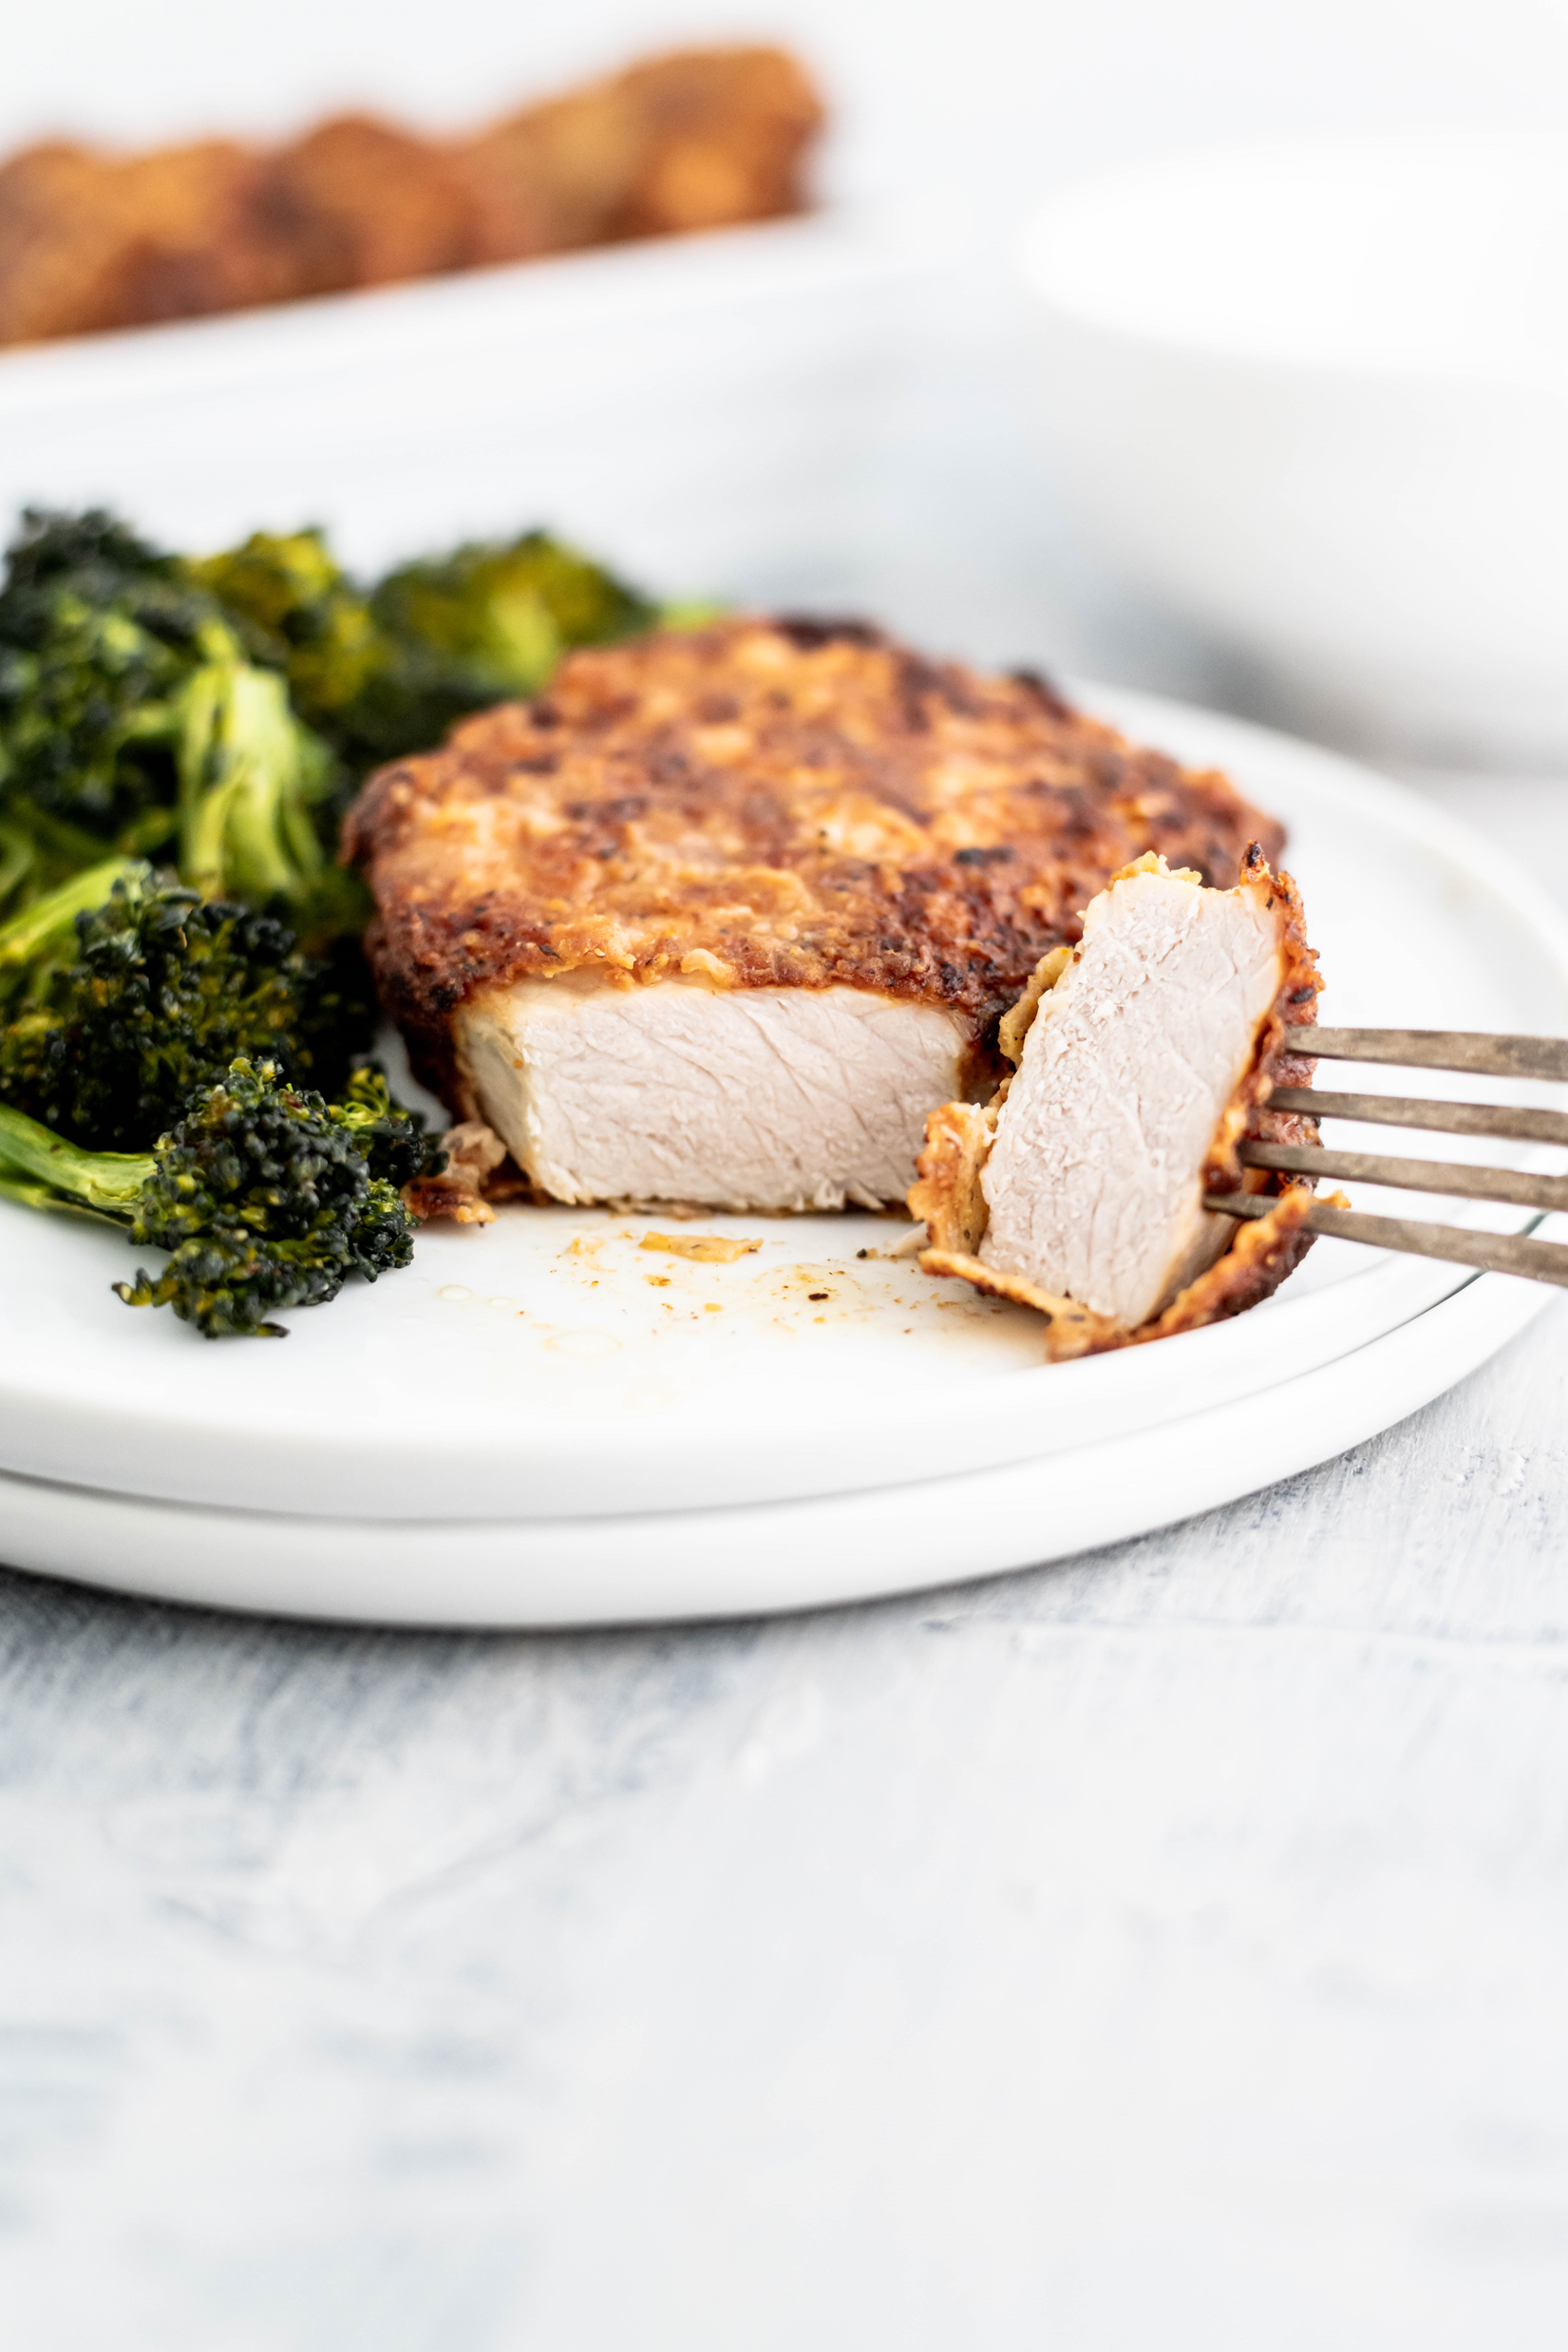 Southern Fried Pork Chop on a round white plate with a bite cut off and on the fork to show the interior of the pork chop. Roasted broccoli on the side.